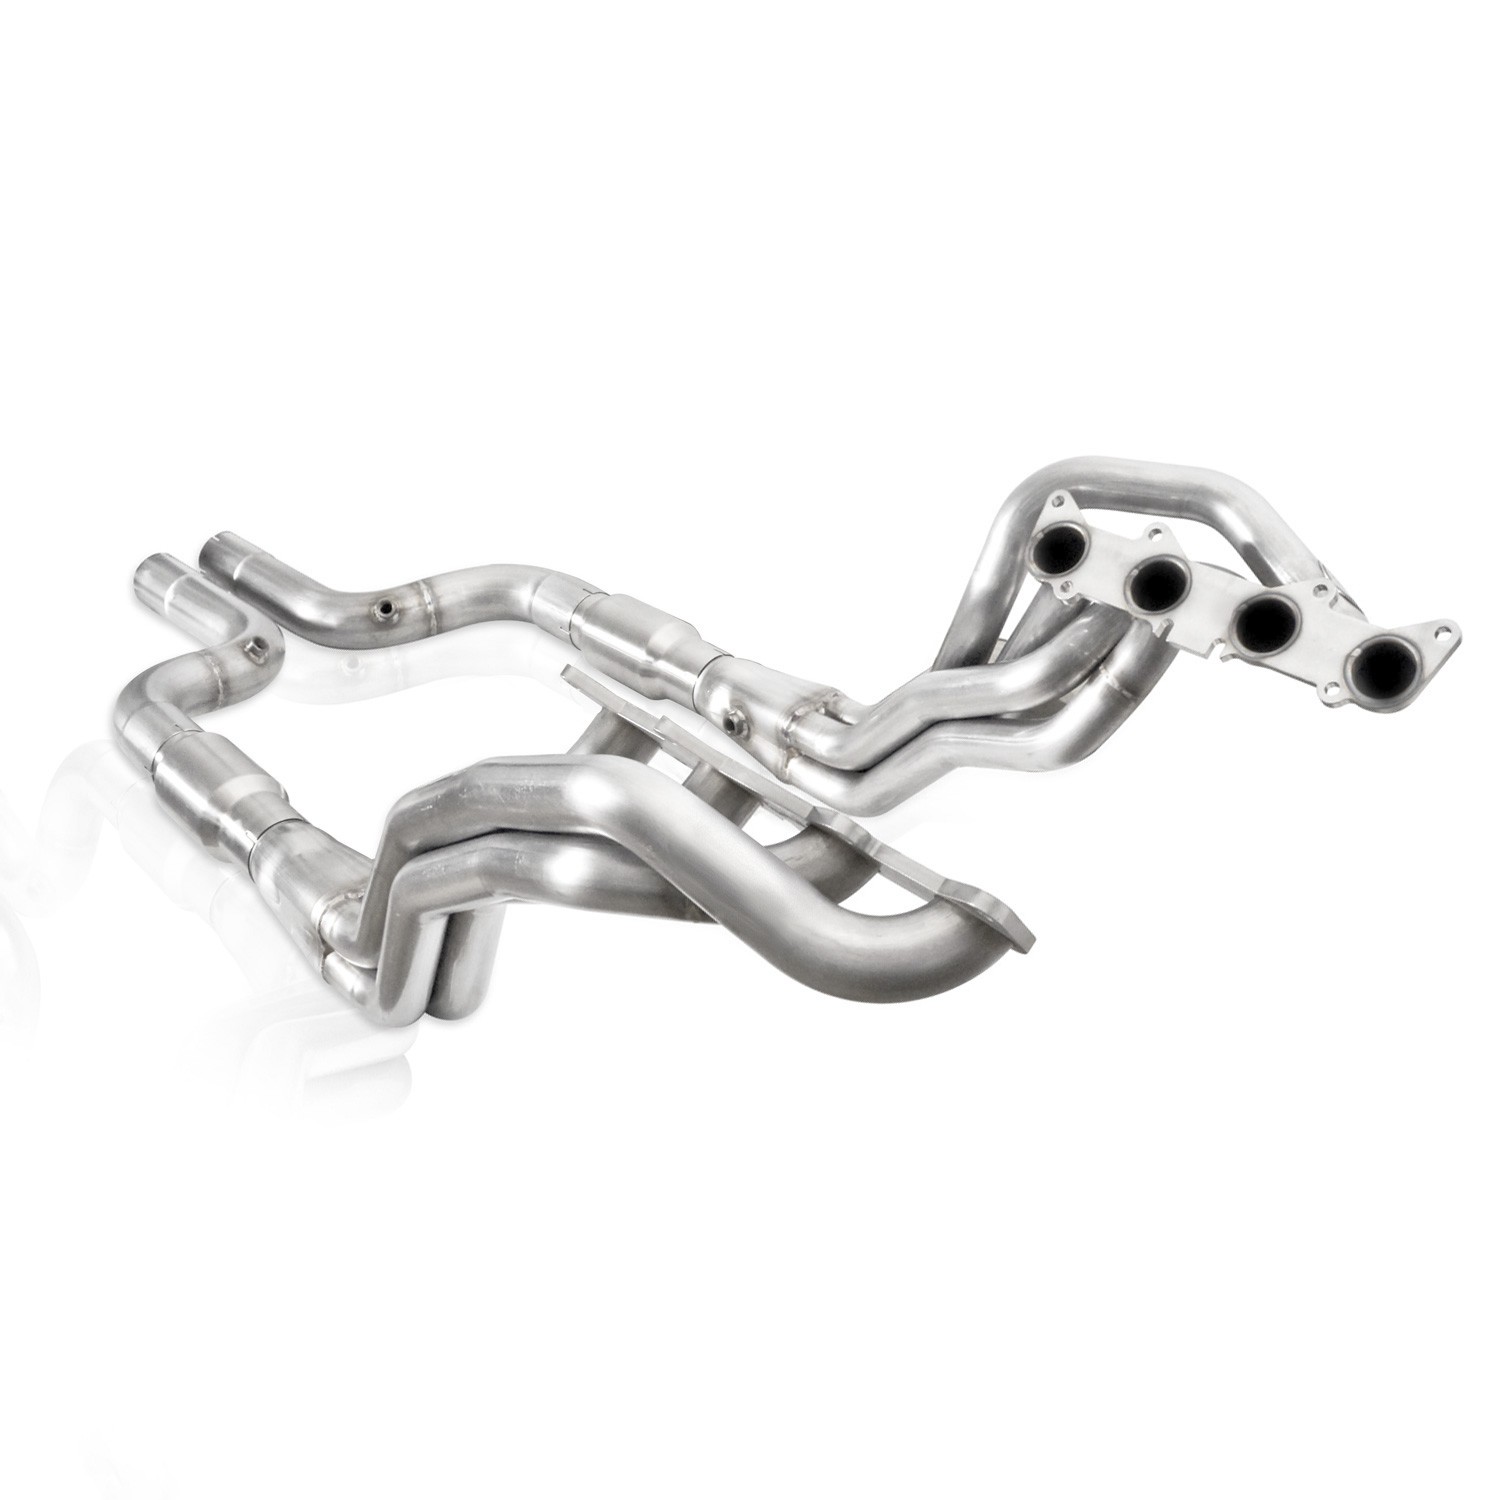 2015-2021 Mustang GT 5.0L Stainless Power Headers 1-7/8" With Catted Leads Aftermarket Connect